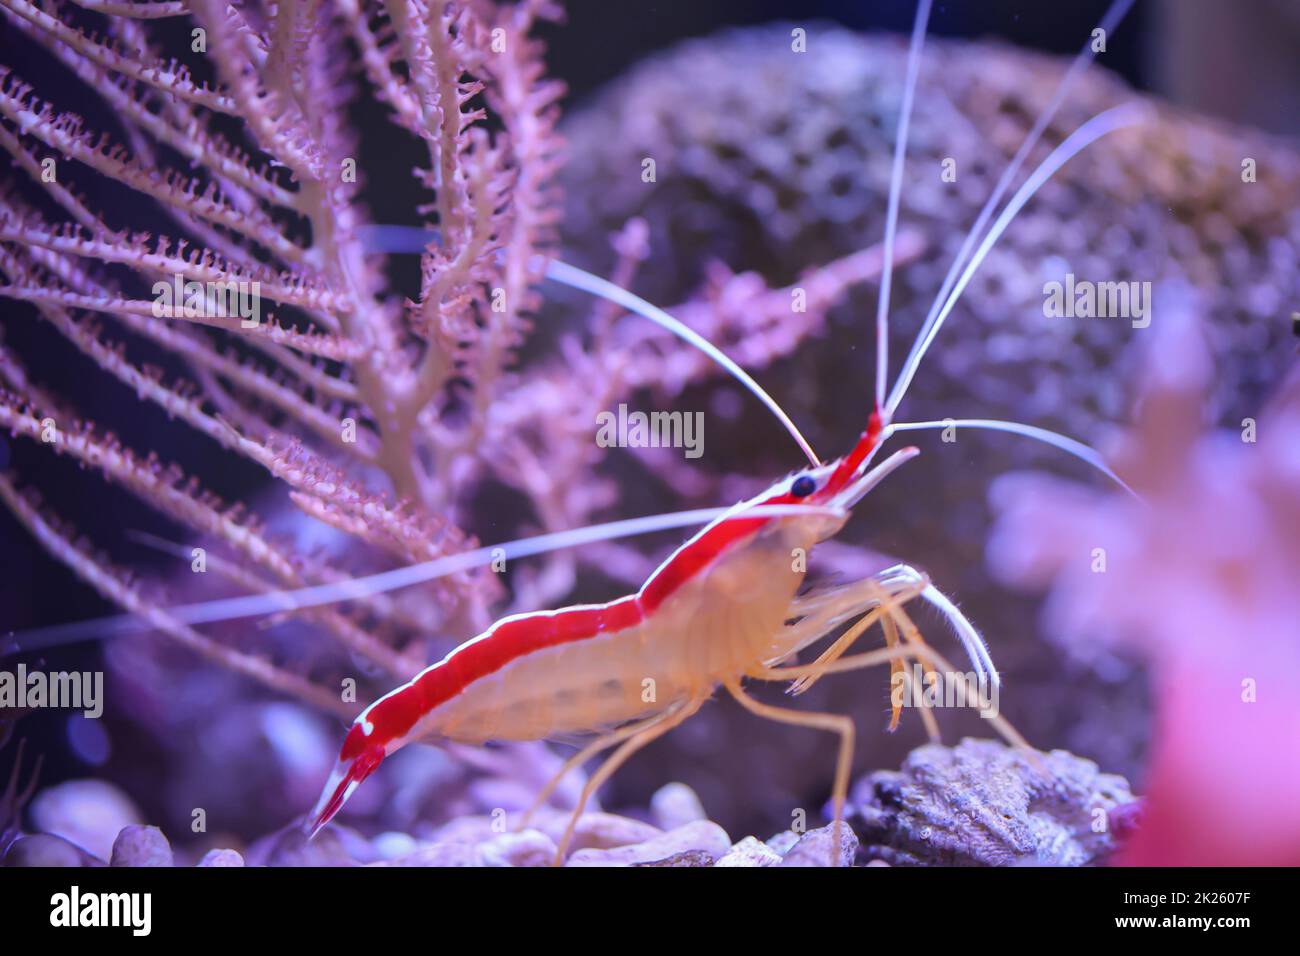 A white banded shrimp in a saltwater aquarium. Stock Photo